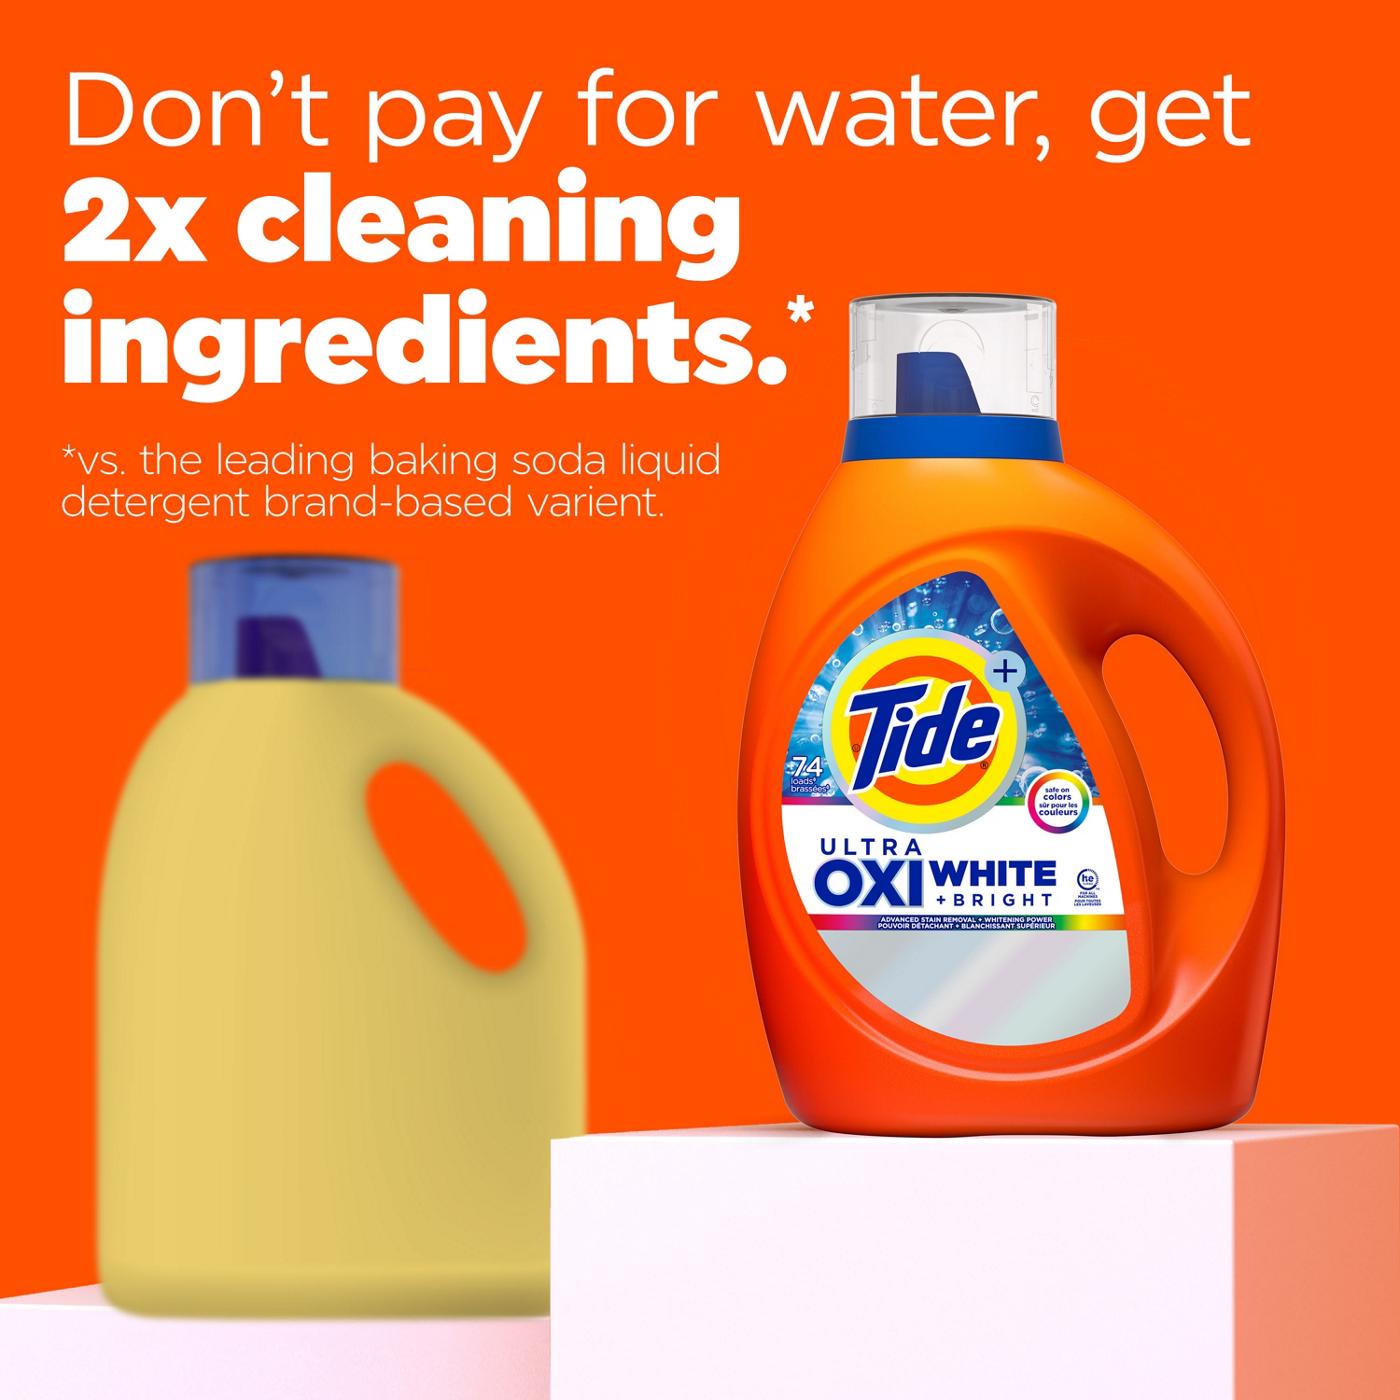 Tide + Ultra Oxi White & Bright HE Turbo Clean Liquid Laundry Detergent, 59 Loads; image 4 of 8